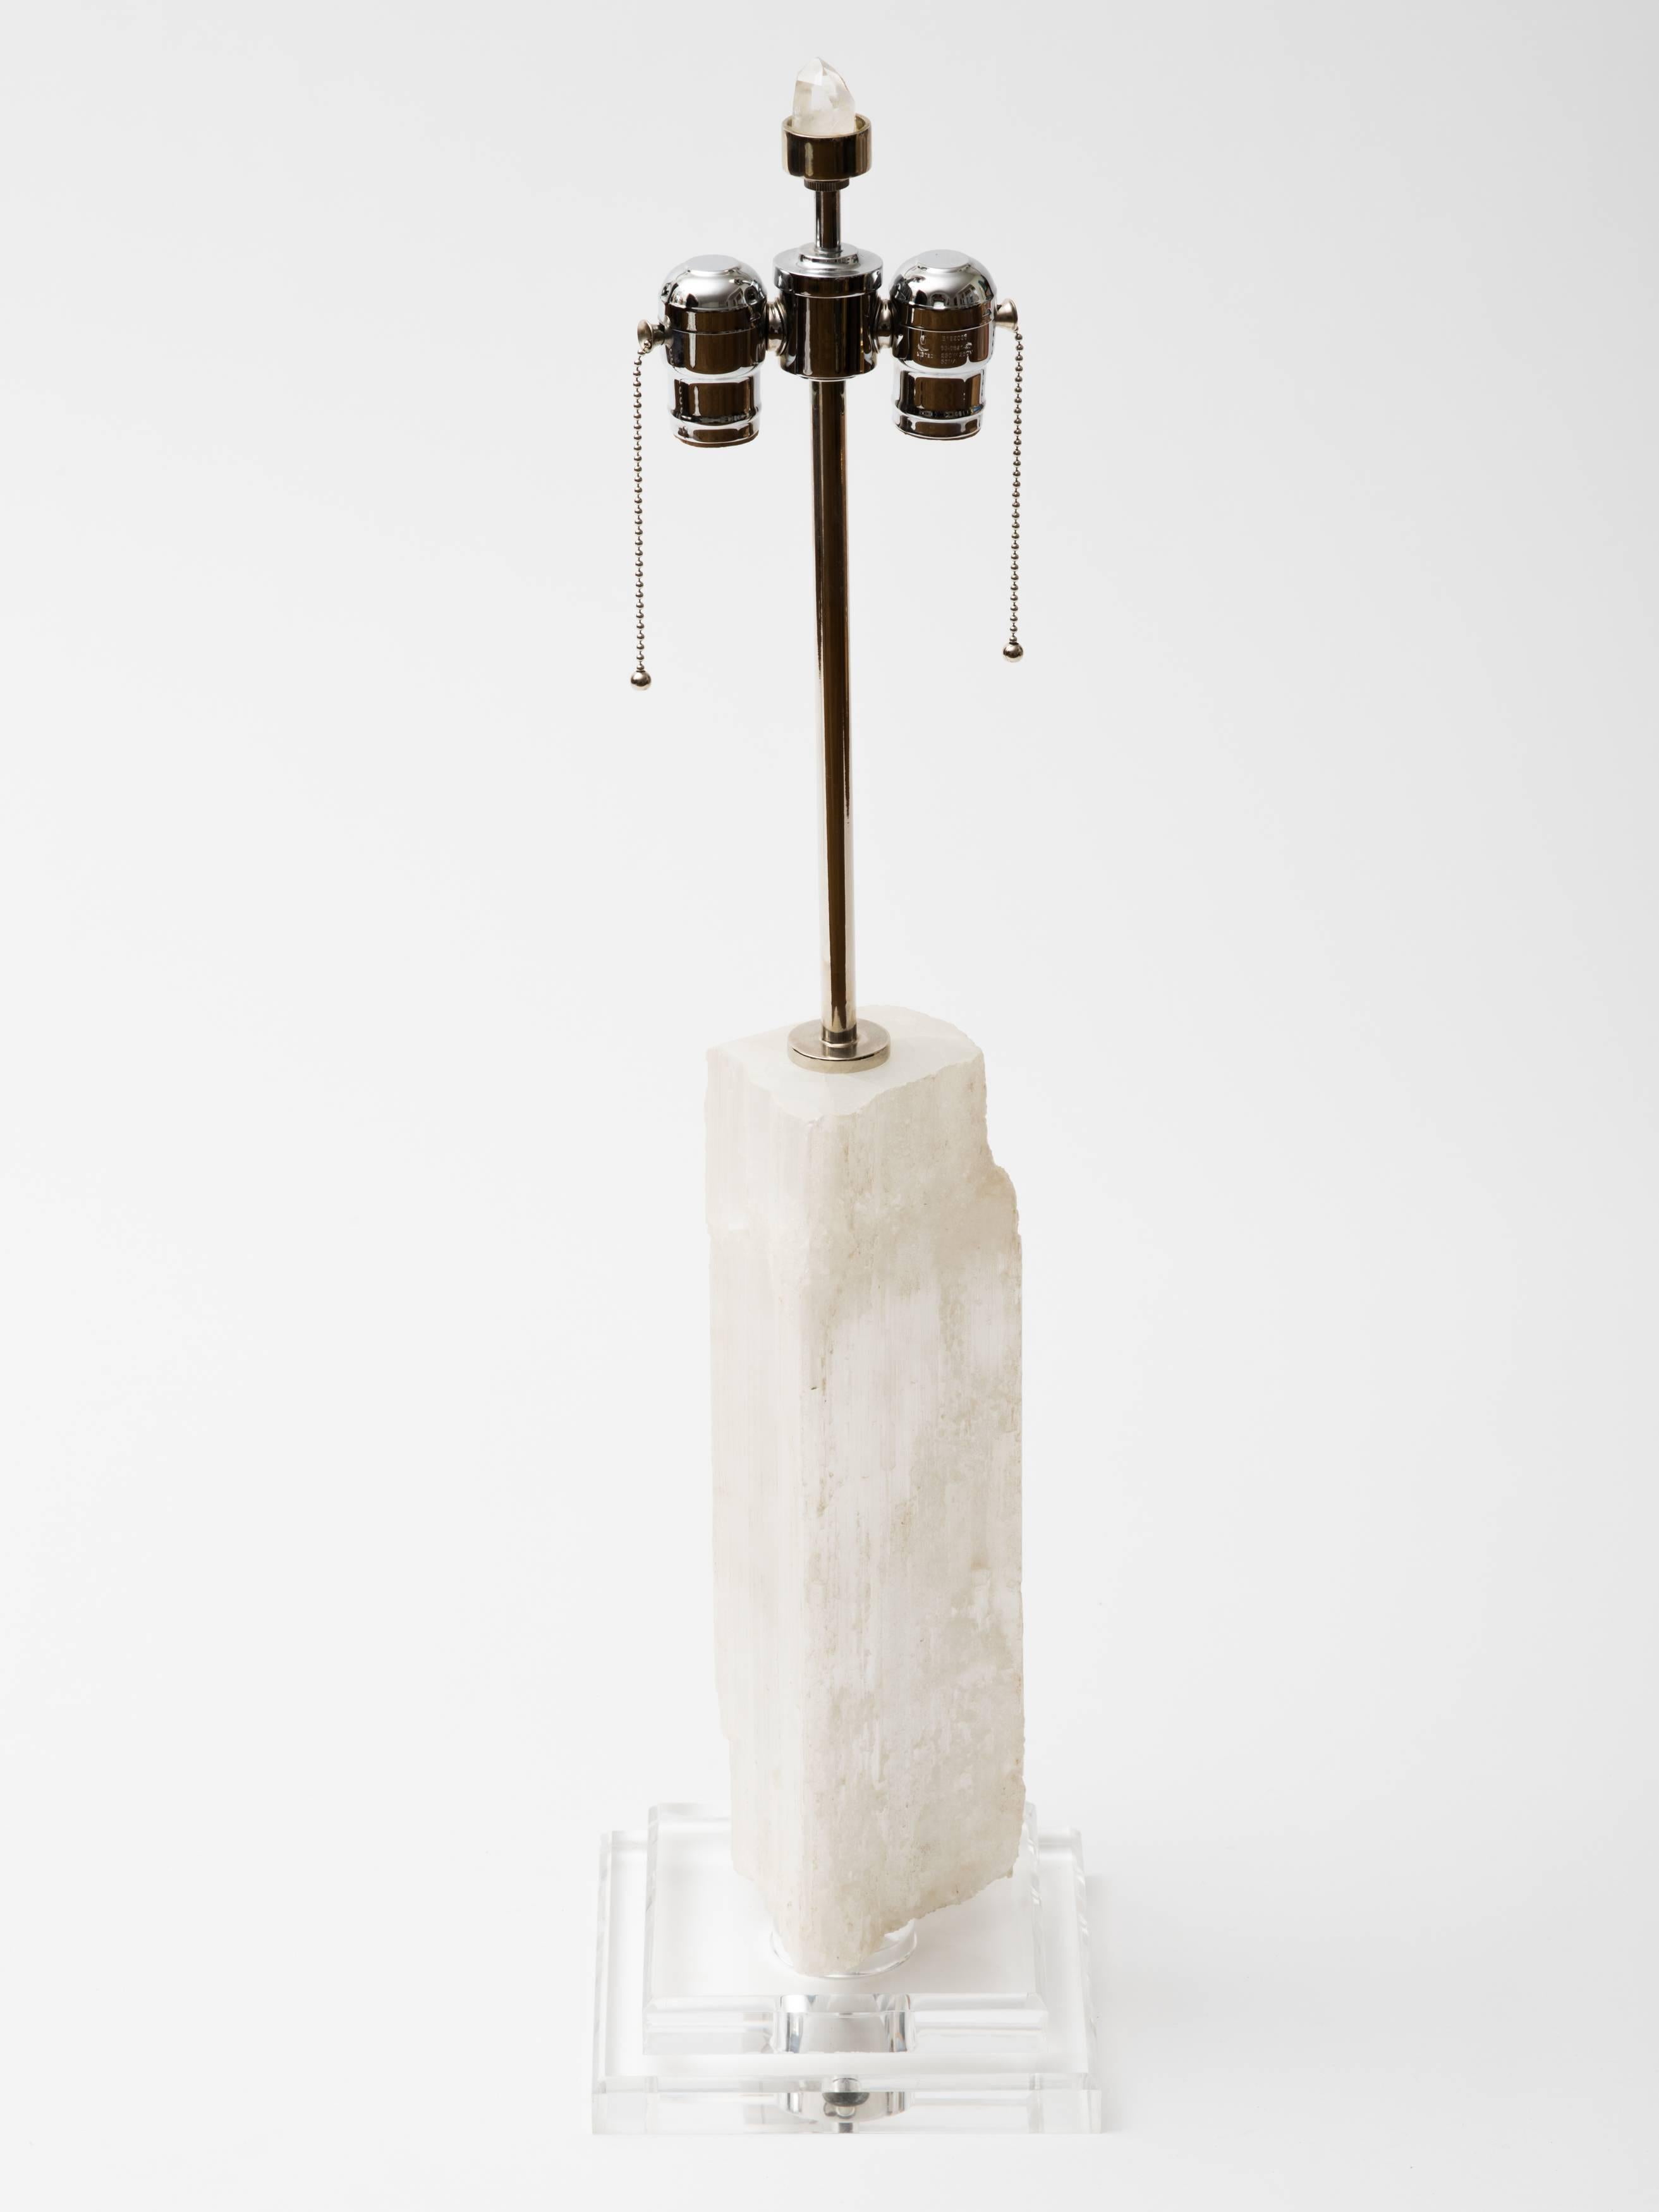 Selenite specimen column lamp with Lucite stepped pedestal square base.
Rock crystal and nickel finial attaches to double socketed nickeled hardware.